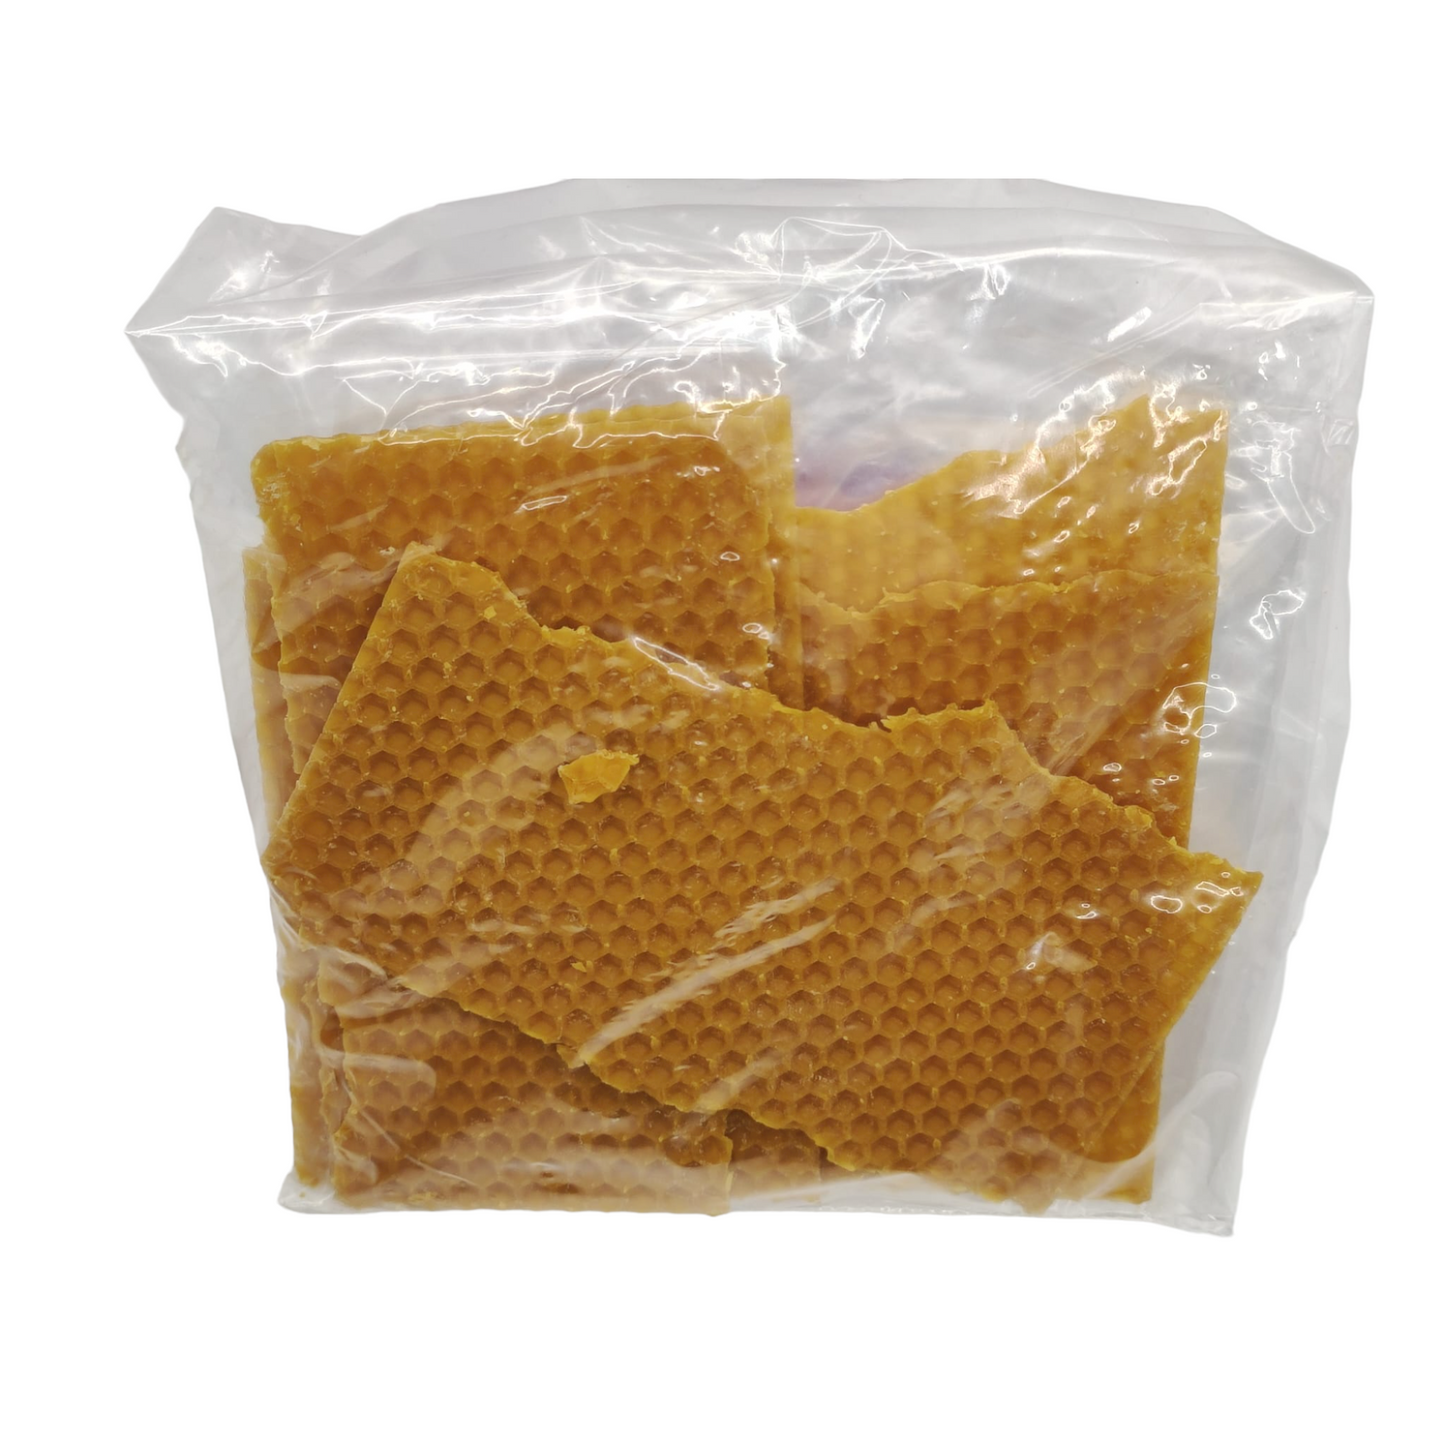 Pack of 50 grams of beeswax.